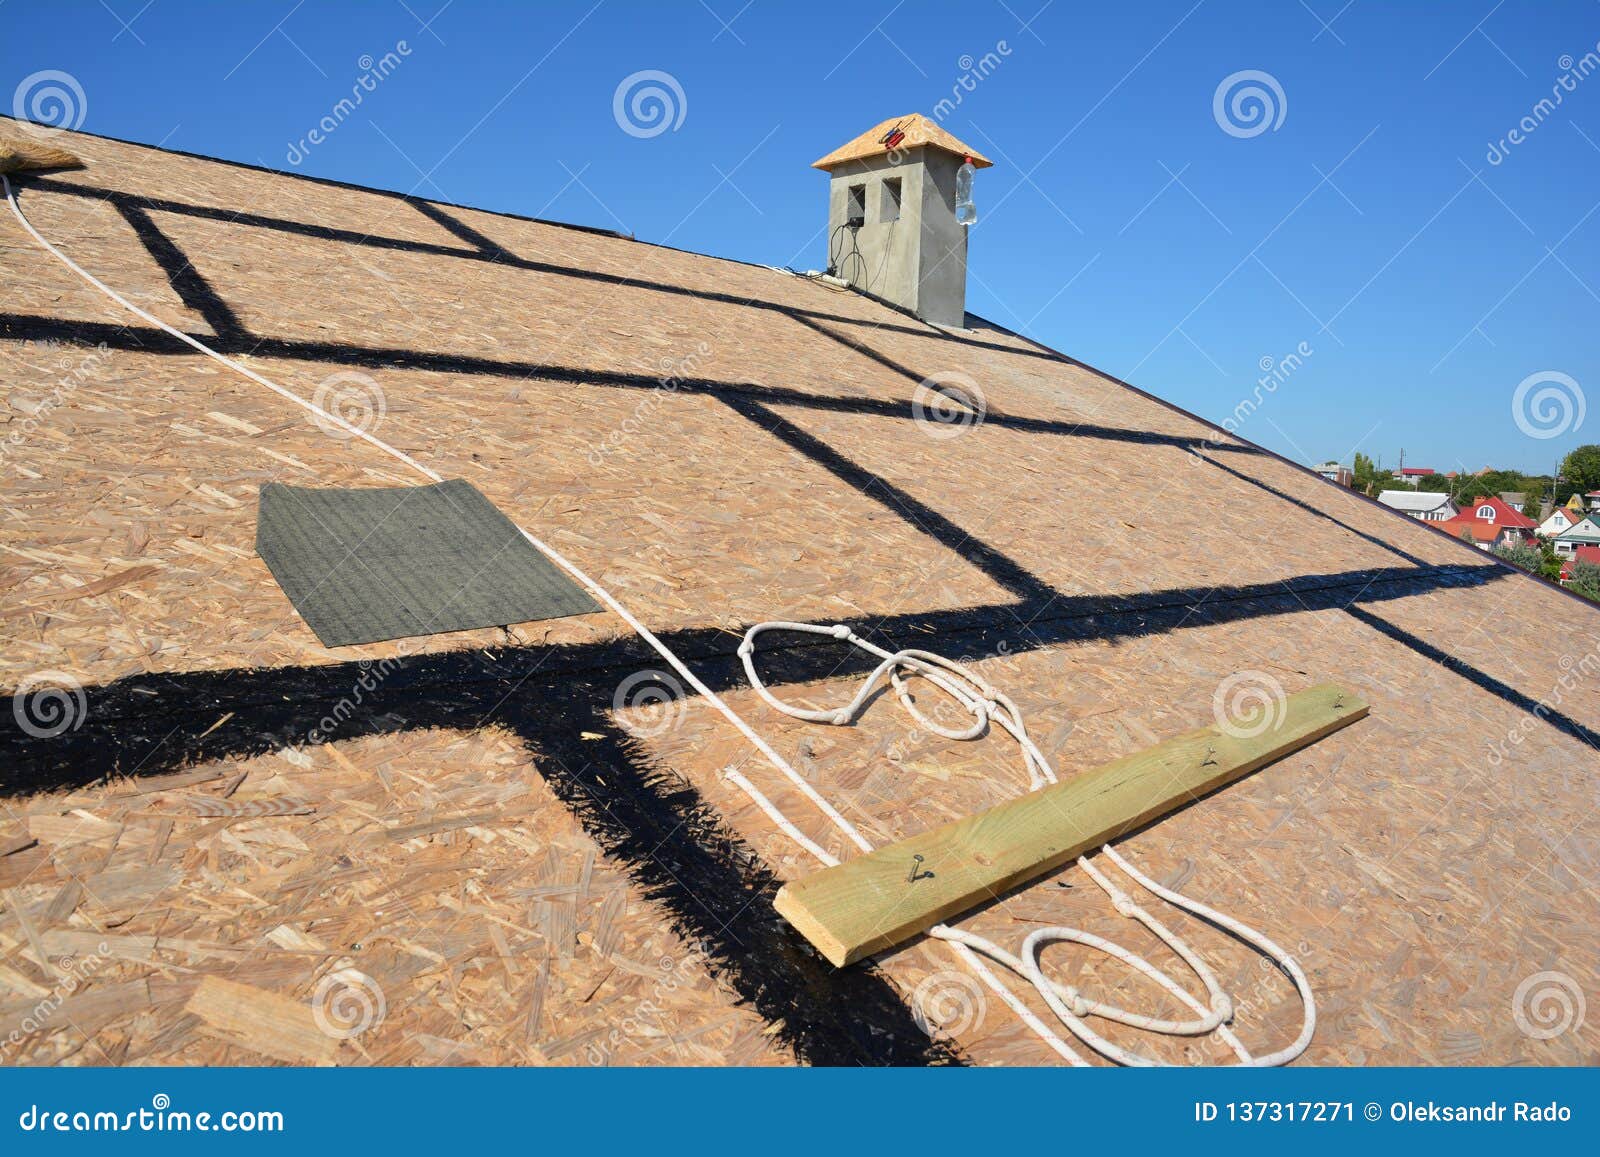 Roofing Preparation Asphalt Shingles Installing on House Construction  Wooden Roof with Bitumen Spray and Protection Rope, Safety Stock Image -  Image of safety, waterproof: 137317271